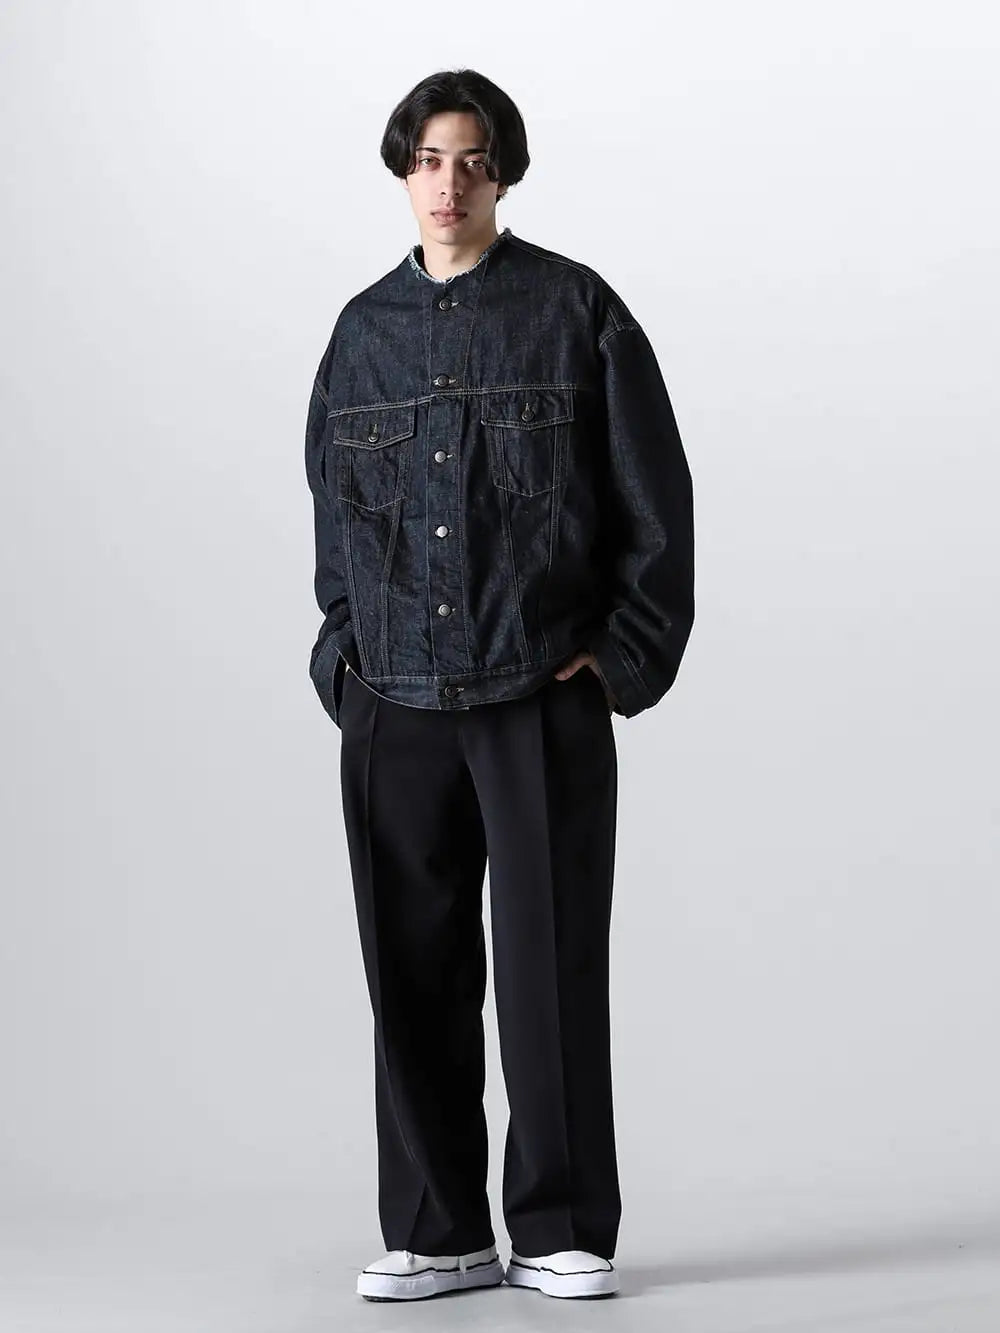 IRENISA 24SS Styling - Brand MIX coding with a denim jacket that expresses a work-in-progress aesthetic as the star of the show a Jacket bursting with professionalism - S50AM0610 - Denim Jacket - IH-24SS-T006-AG-Black-Black-cord - Short Sleeved T-Shirt Black × Black cord - IH-24SS-P018-ND-Dark-Navy - Two Tucks Wide Trousers Dark Navy - A02FW704-white-classic - BAKER Original sole canvas Low cut sneaker White 1-001